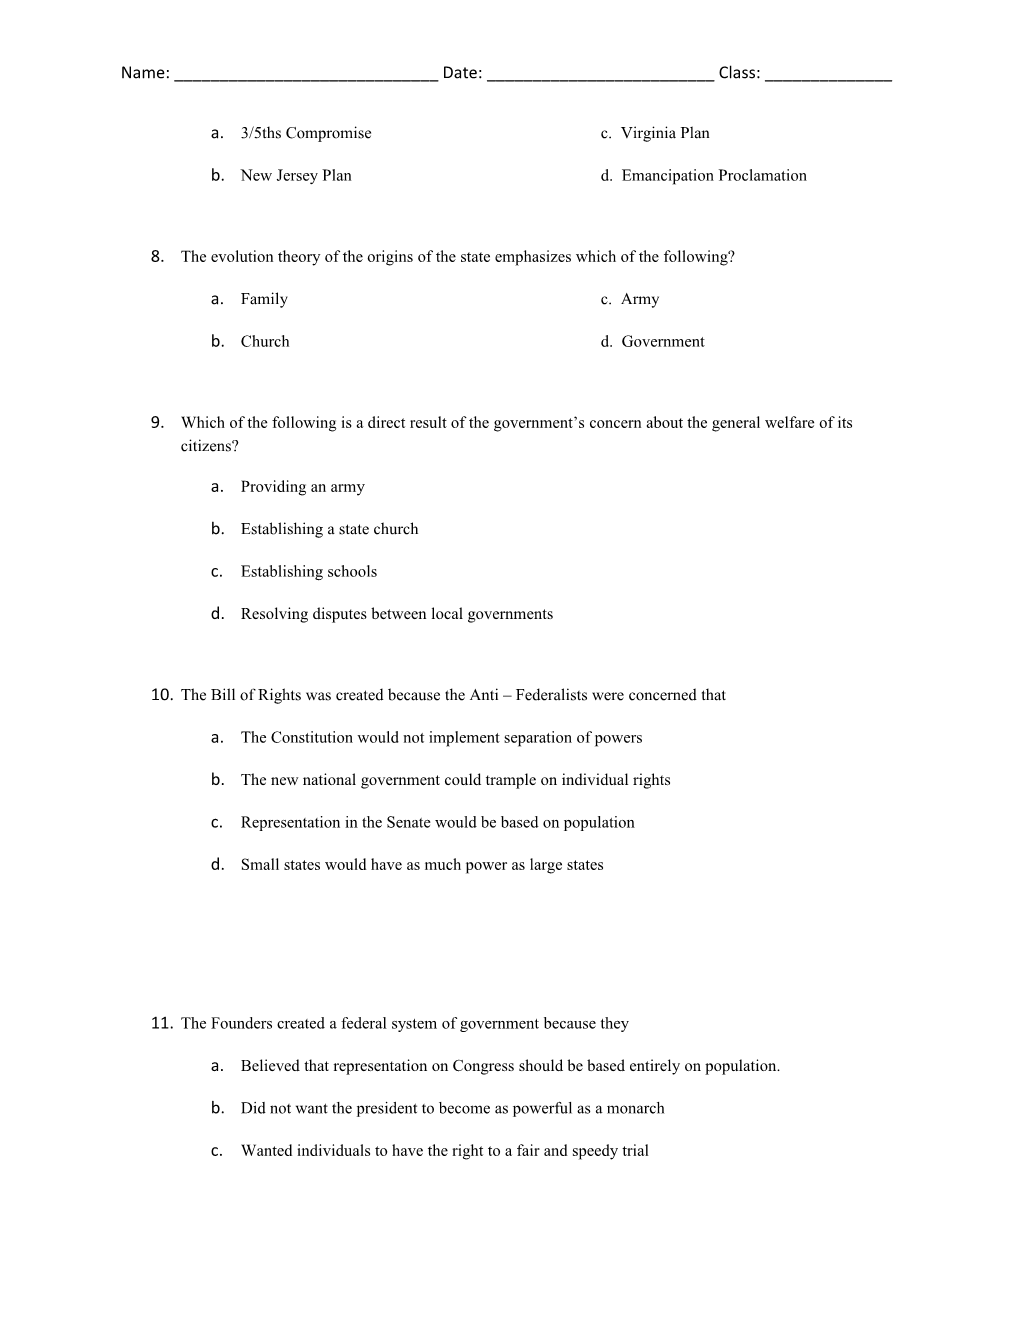 Foundations of American Government Exam (Ch.1, Ch.2, Ch.3, Ch.4)